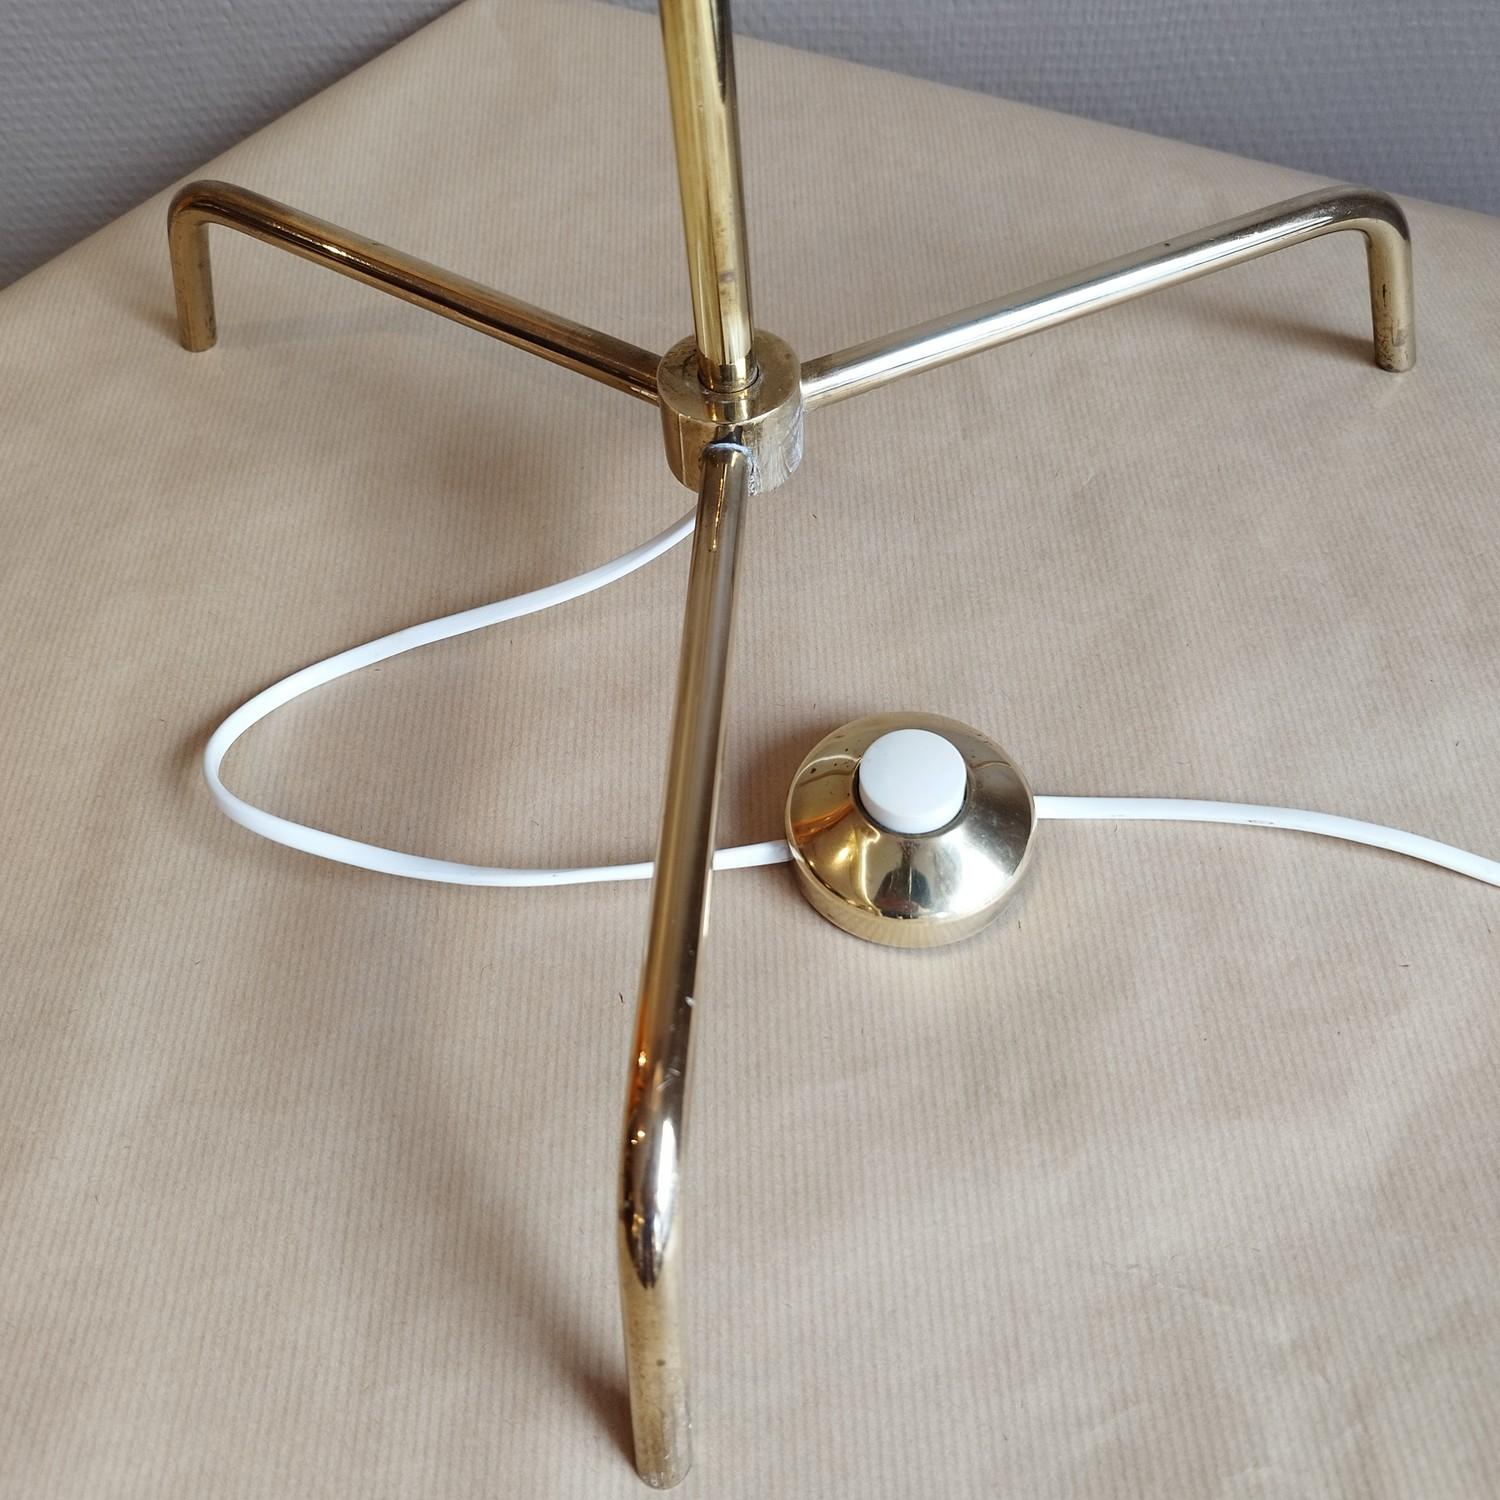 Gorgeous brass and painted metal floor lamp in the quality of Lunel productions. It has been rewired. The floor switch is in brass. 